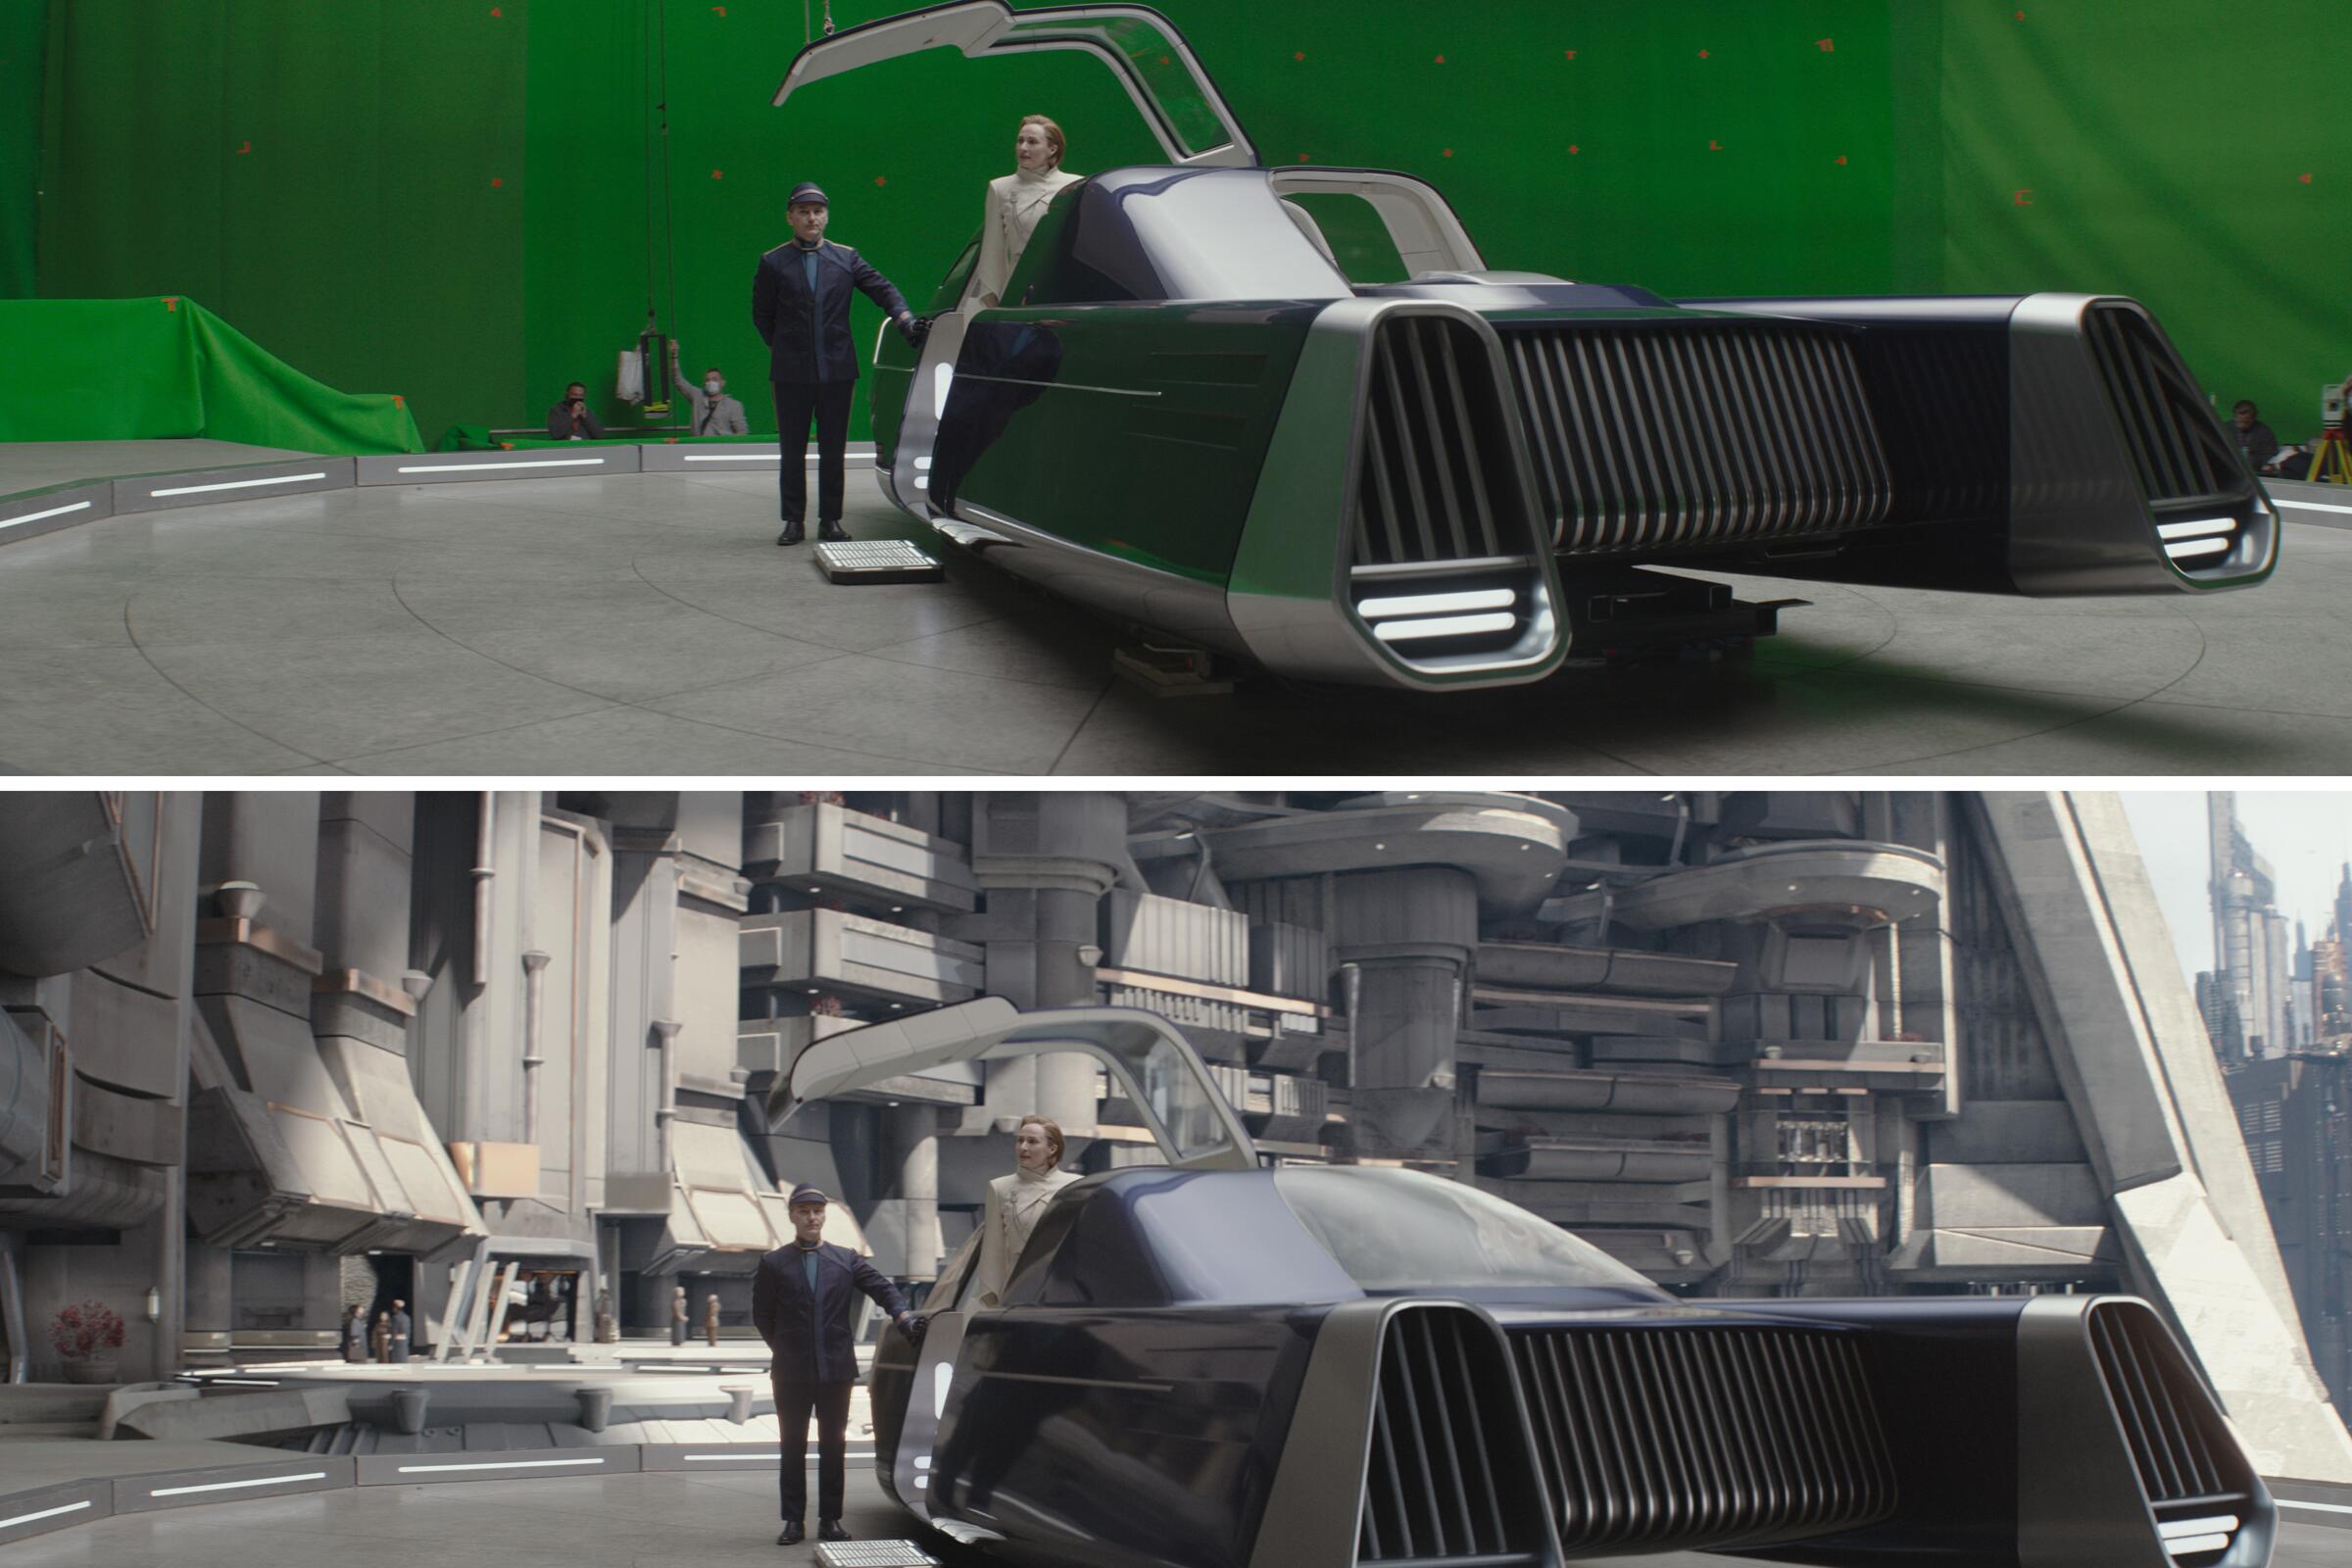 Top: A woman exits a futuristic car on a green-screen stage. Bottom: Same woman, same car, now amid a filled-in city planet.